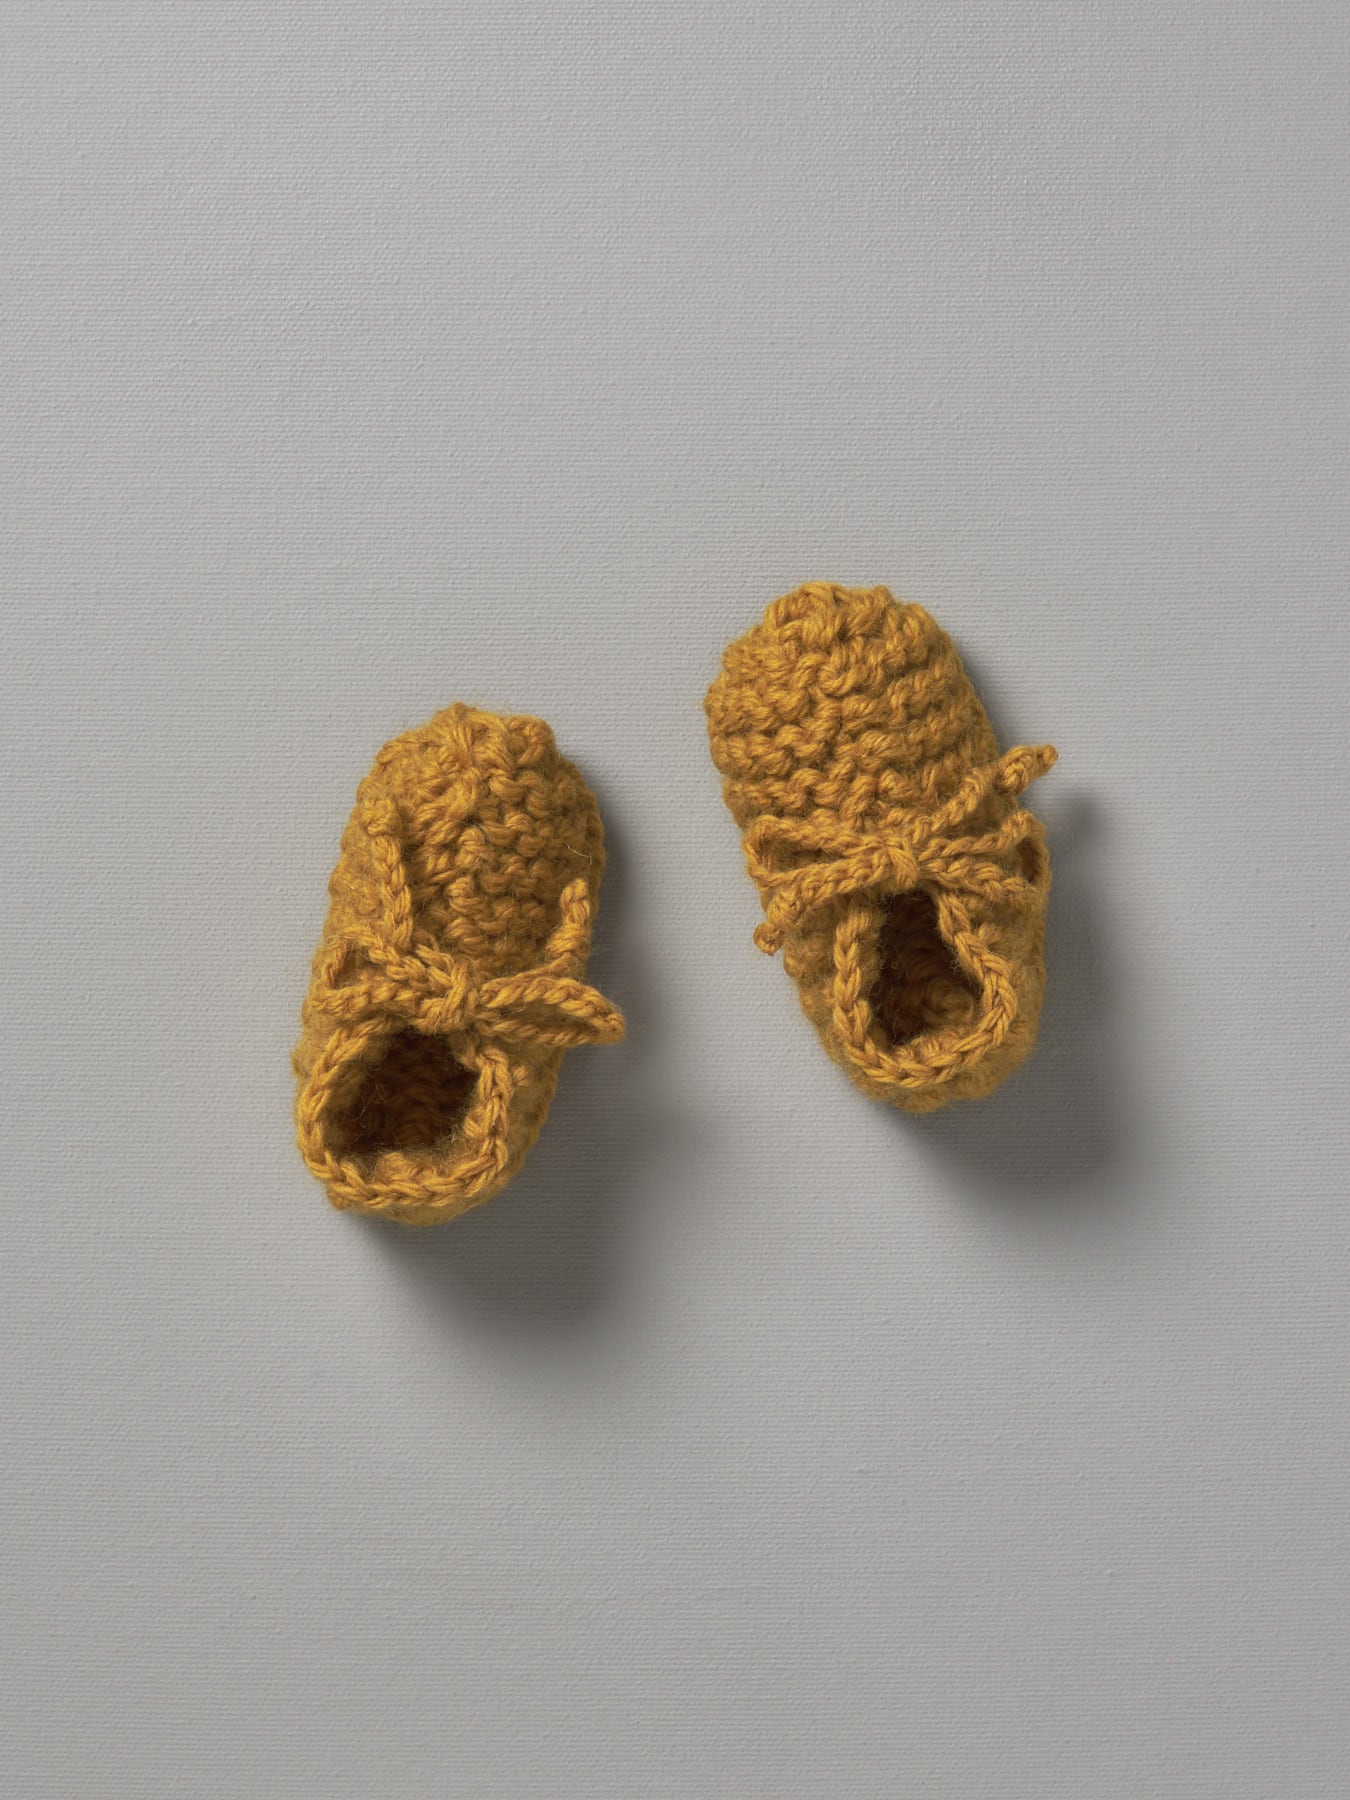 A pair of Weebits Hand Knitted Chunky Booties - Mustard baby shoes on a white surface.